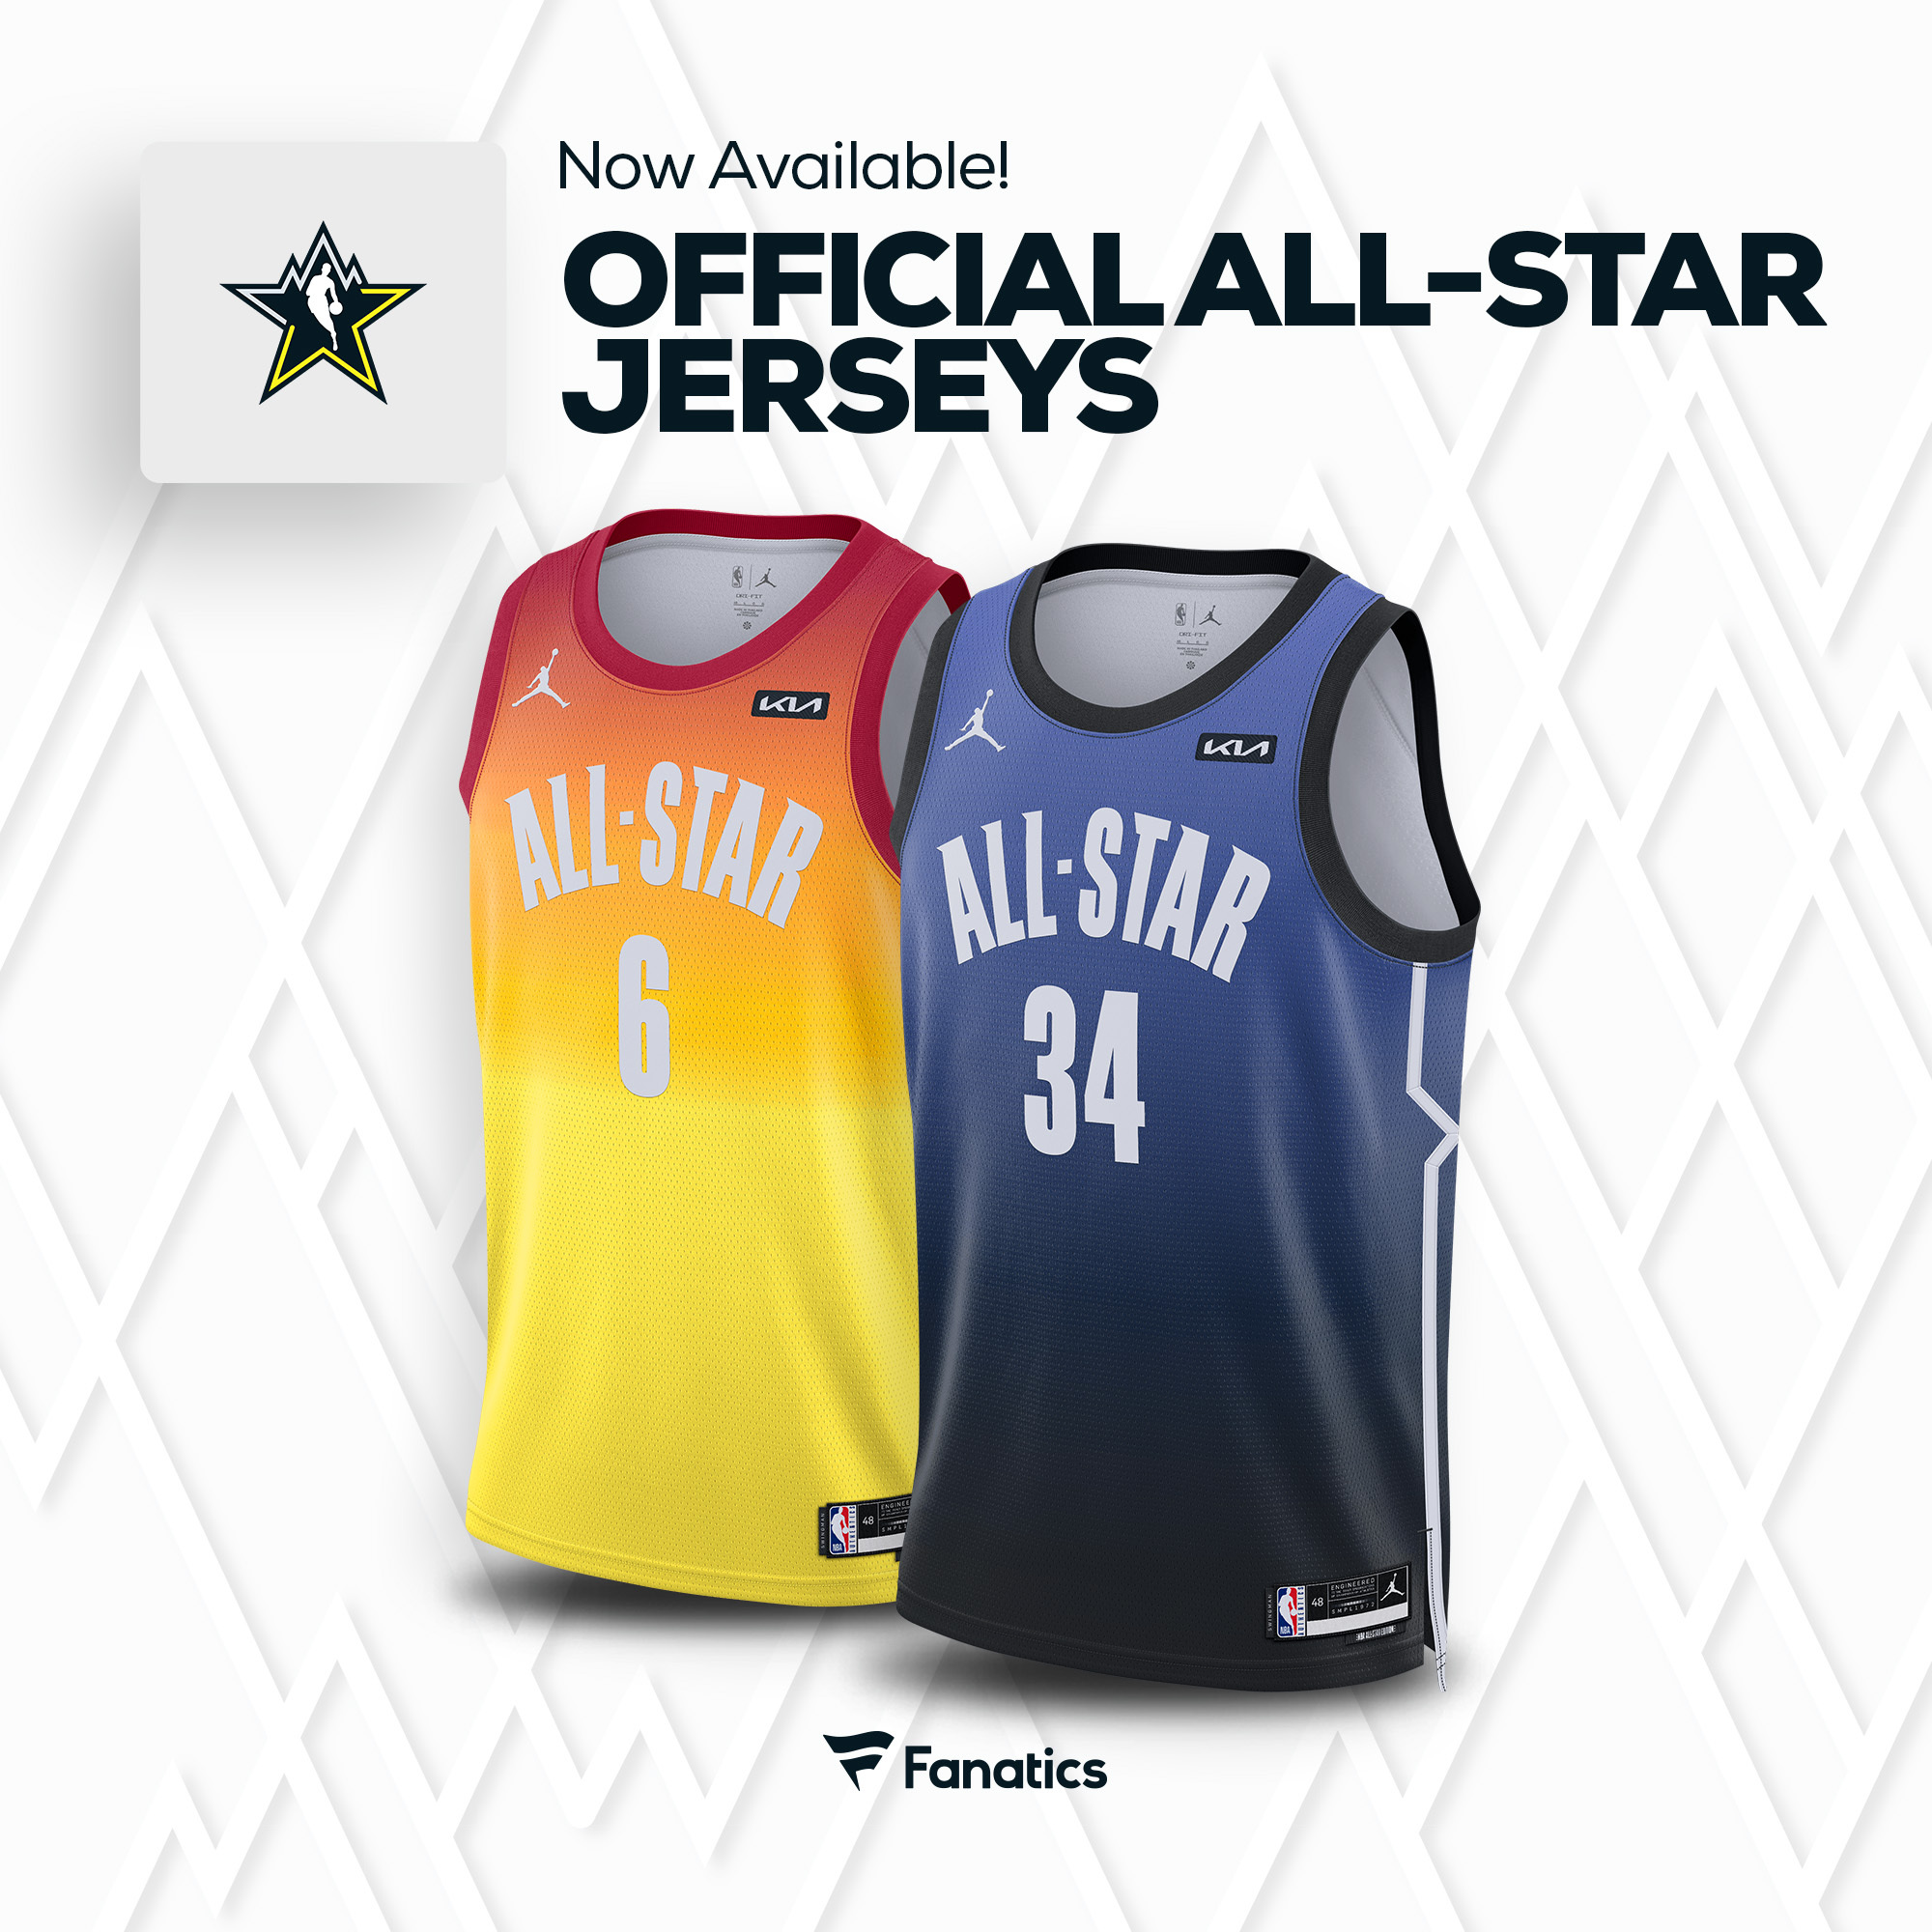 Fanatics on X: The @NBA All-Star jerseys are here! 🔥 Who will